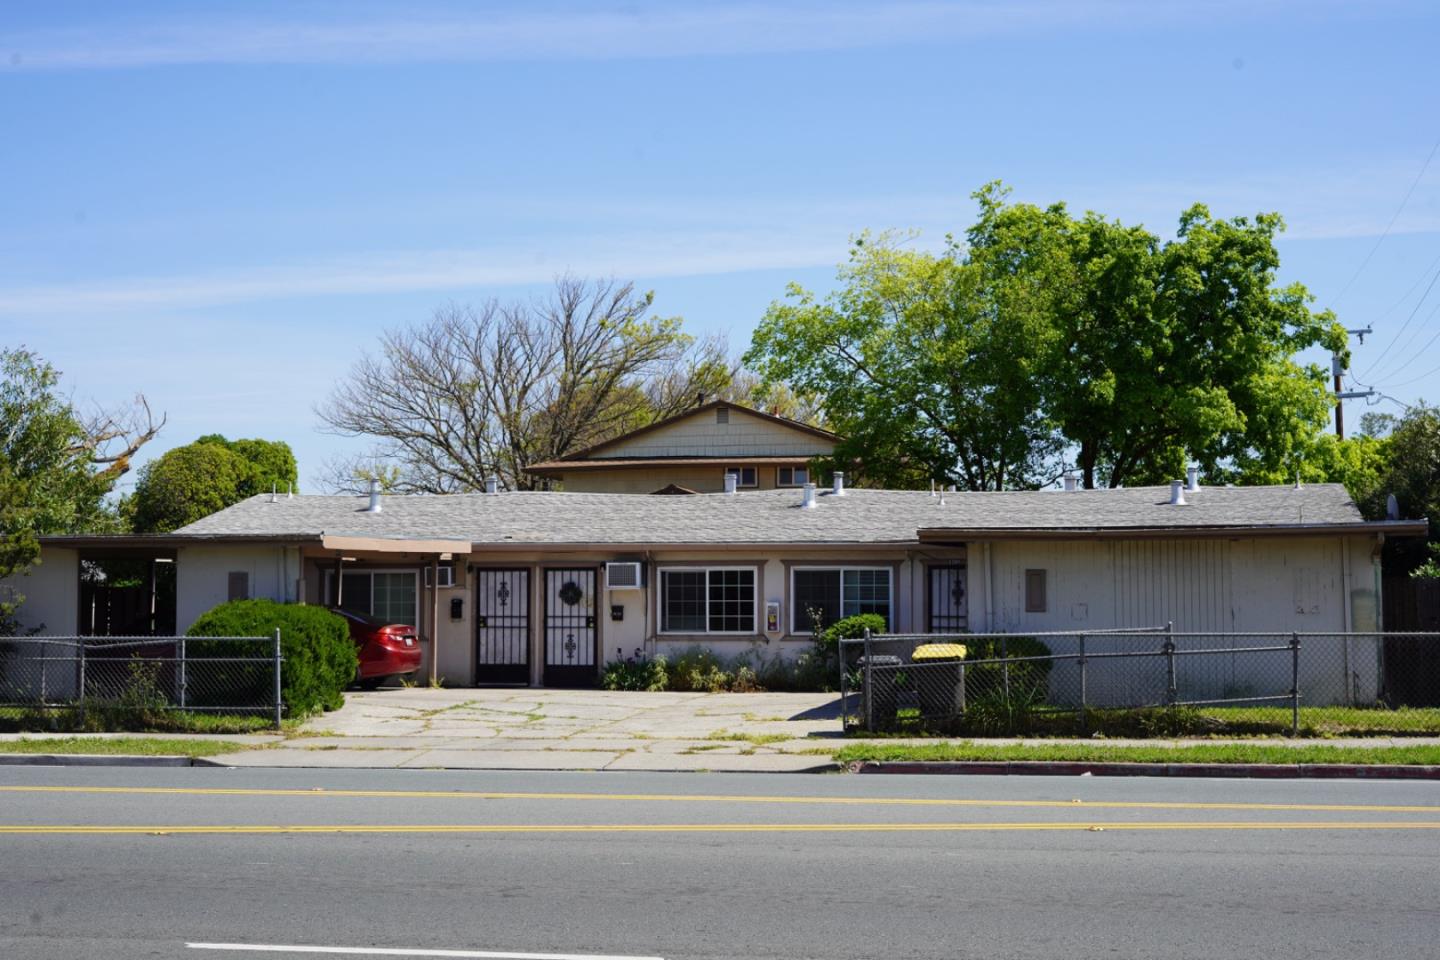 Photo of 4108 N Pershing Ave in Stockton, CA